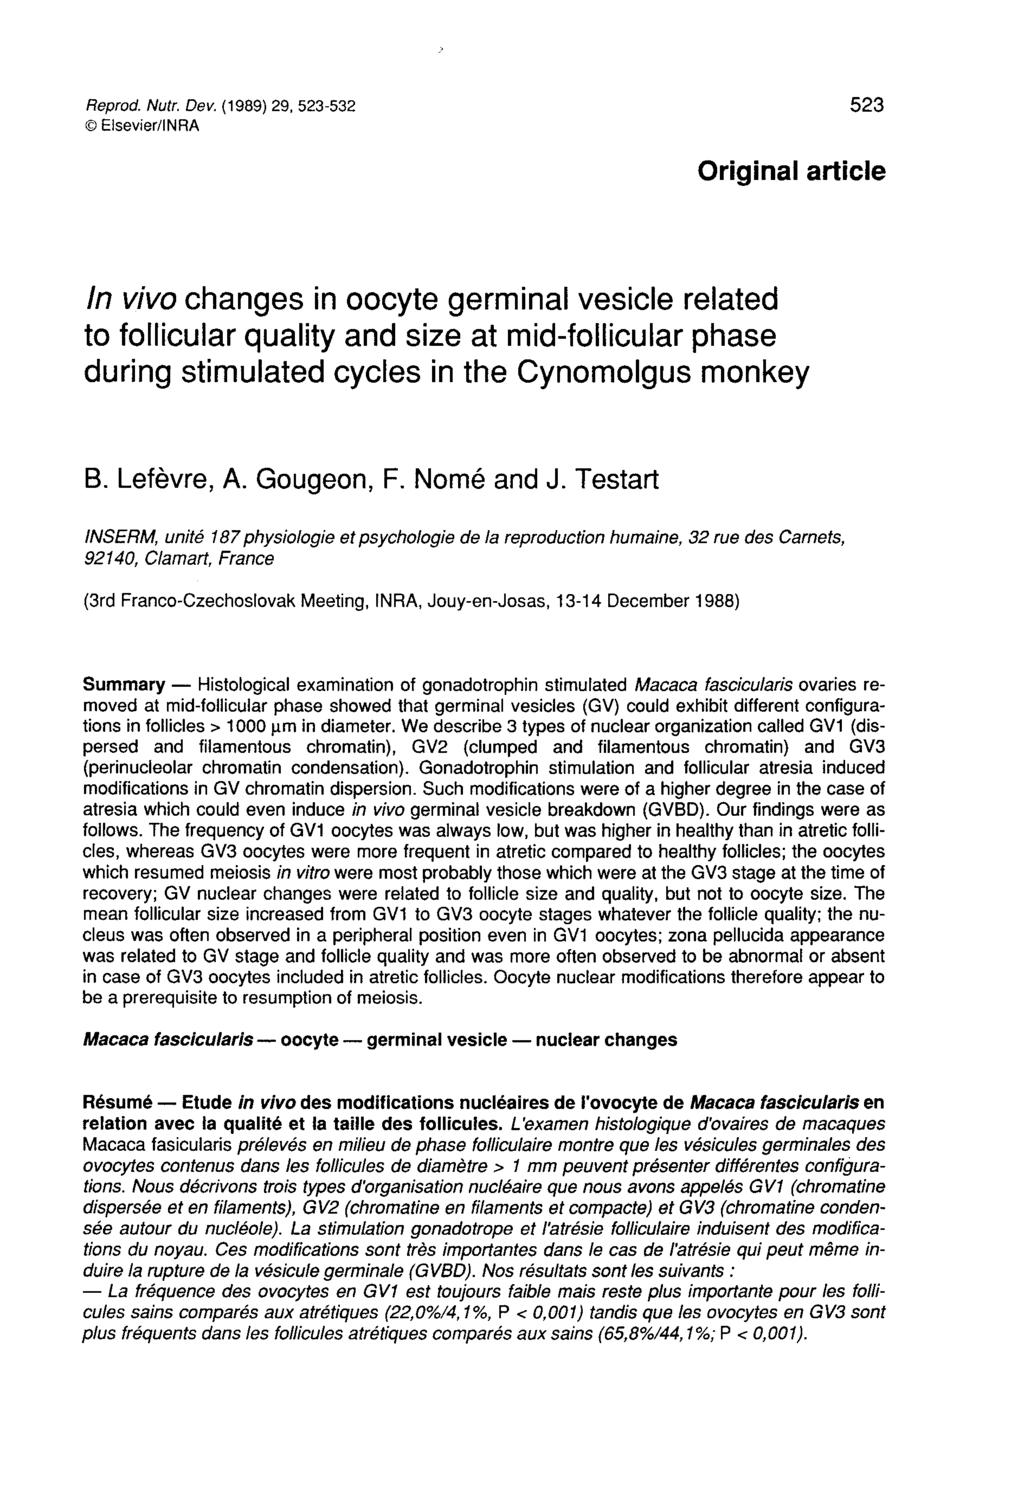 La Original article In vivo changes in oocyte germinal vesicle related to follicular quality and size at midfollicular phase during stimulated cycles in the Cynomolgus monkey B. Lefèvre A. Gougeon F.